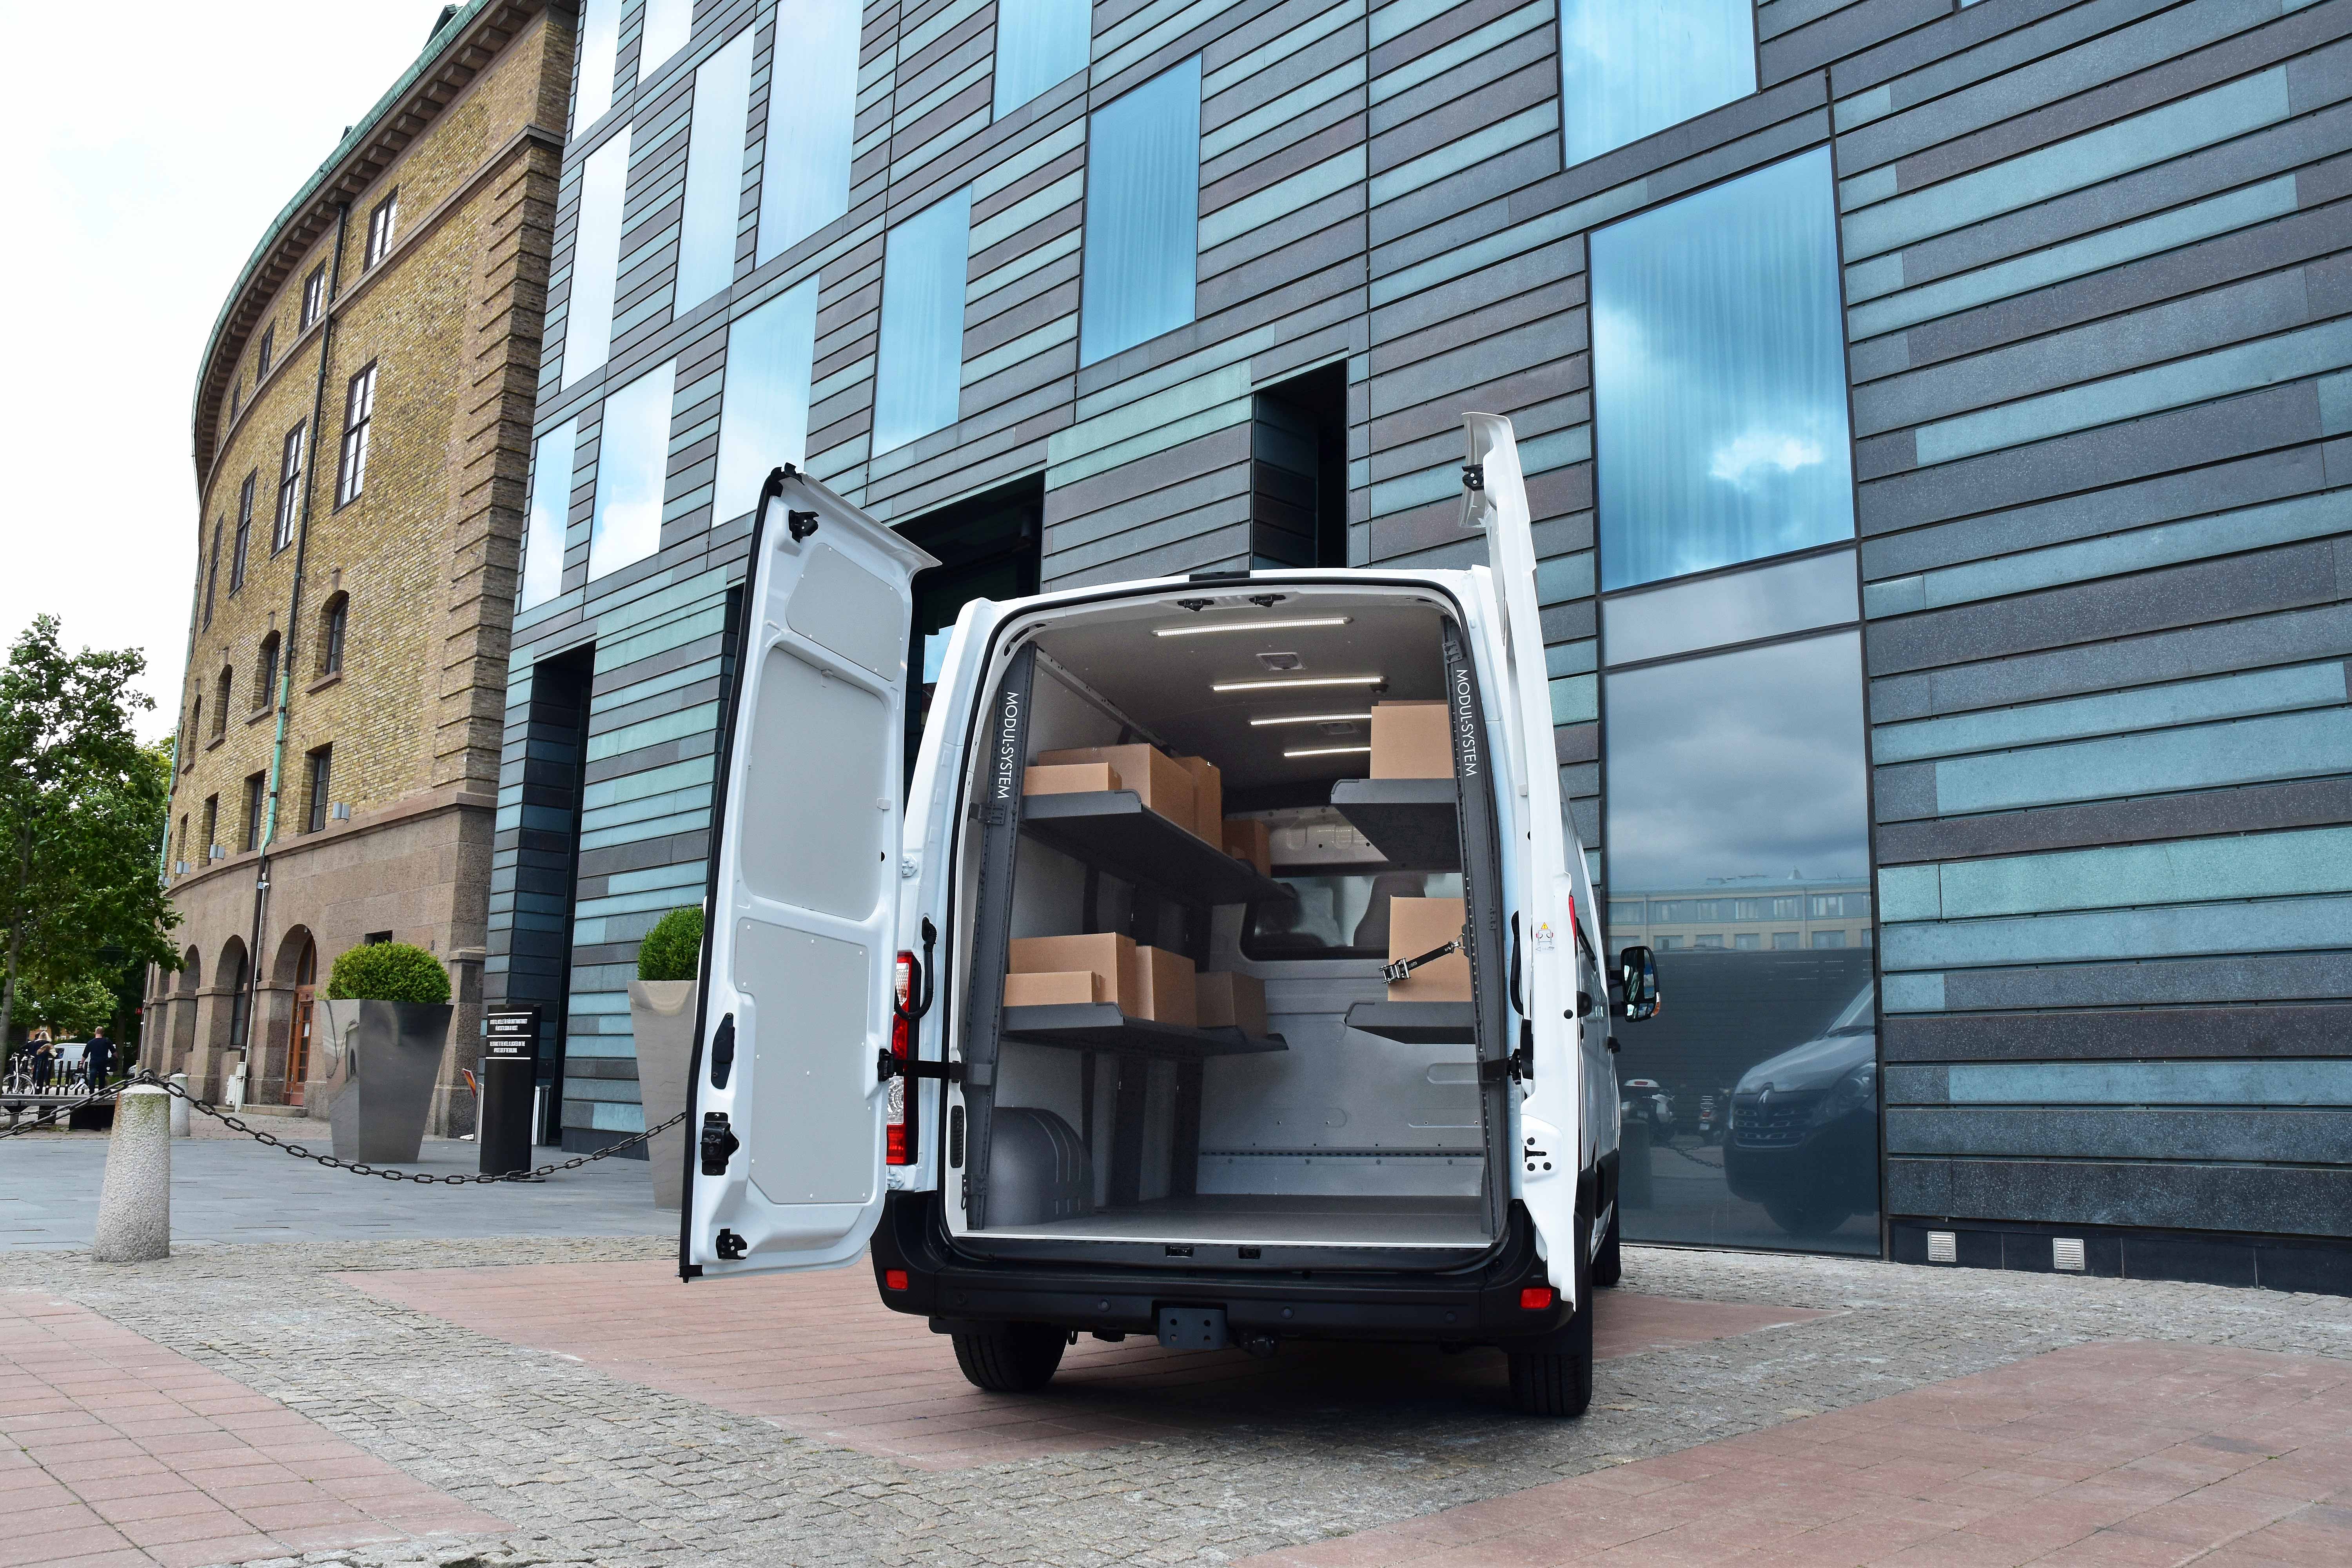 Van fitted out with modul-express van shelving holding delivery boxes